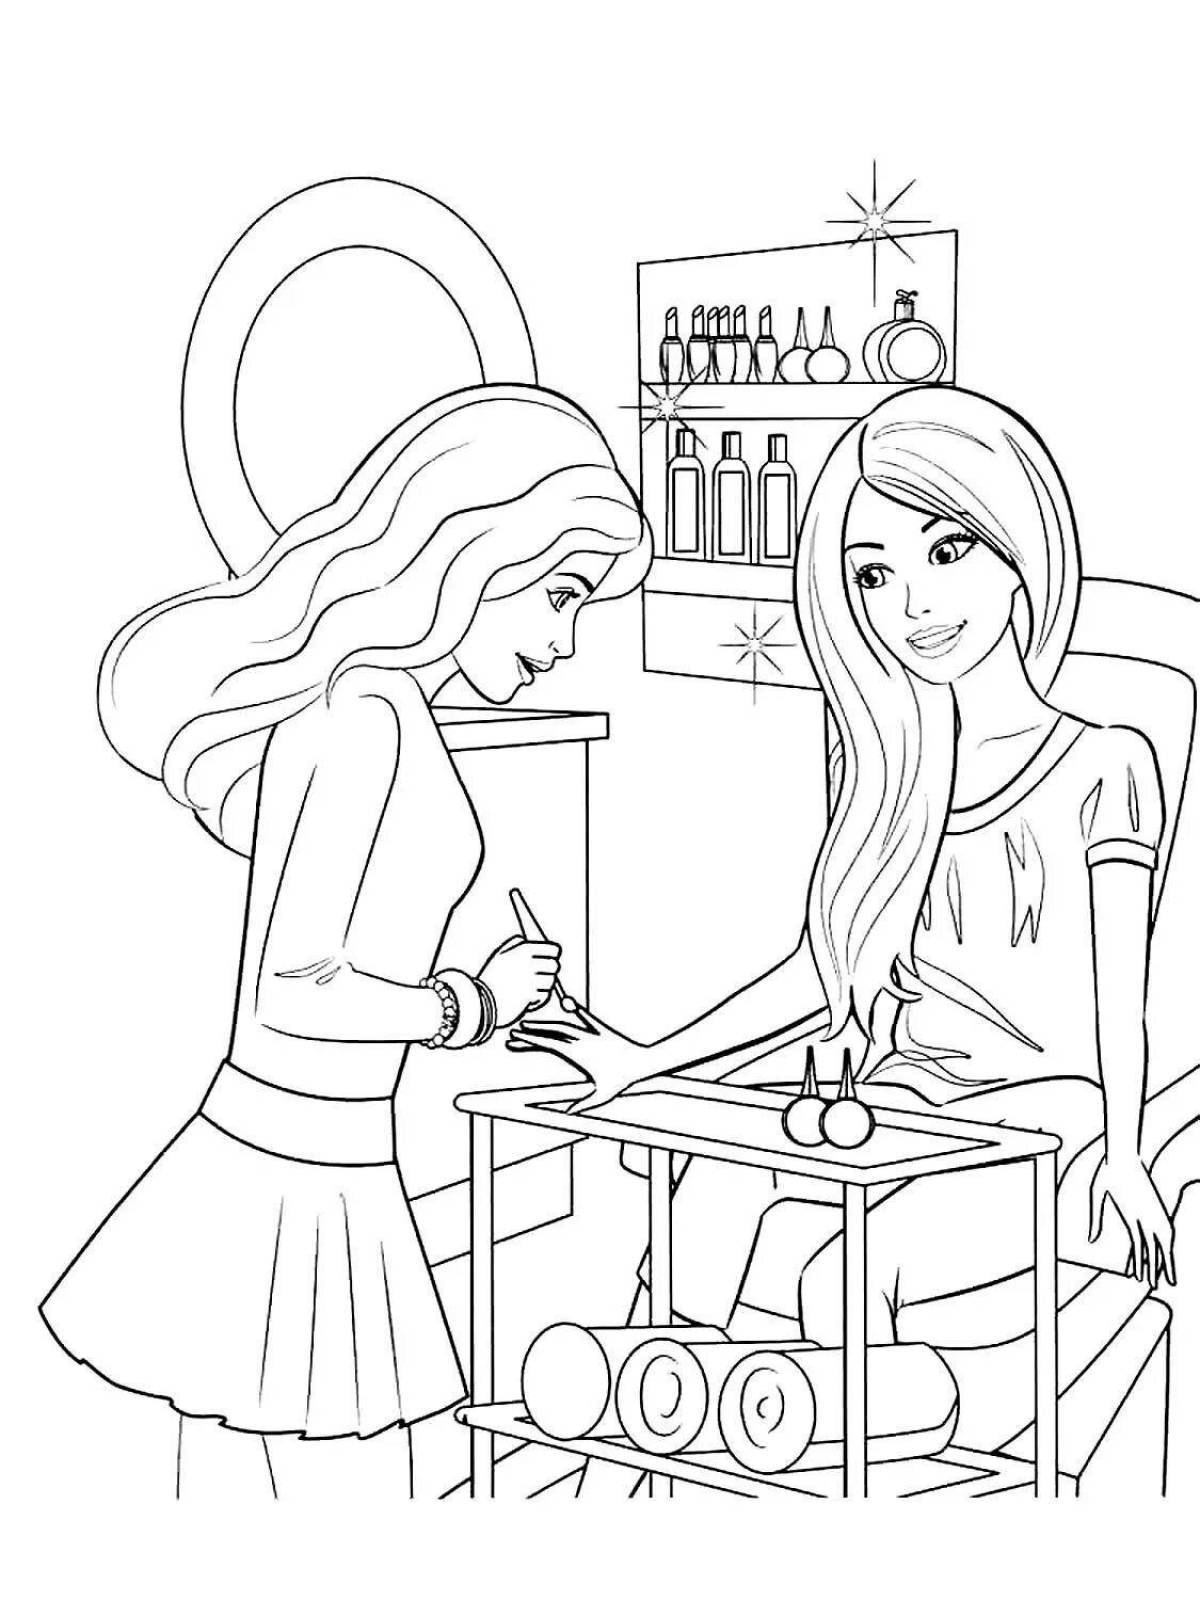 Colorful barbie coloring page